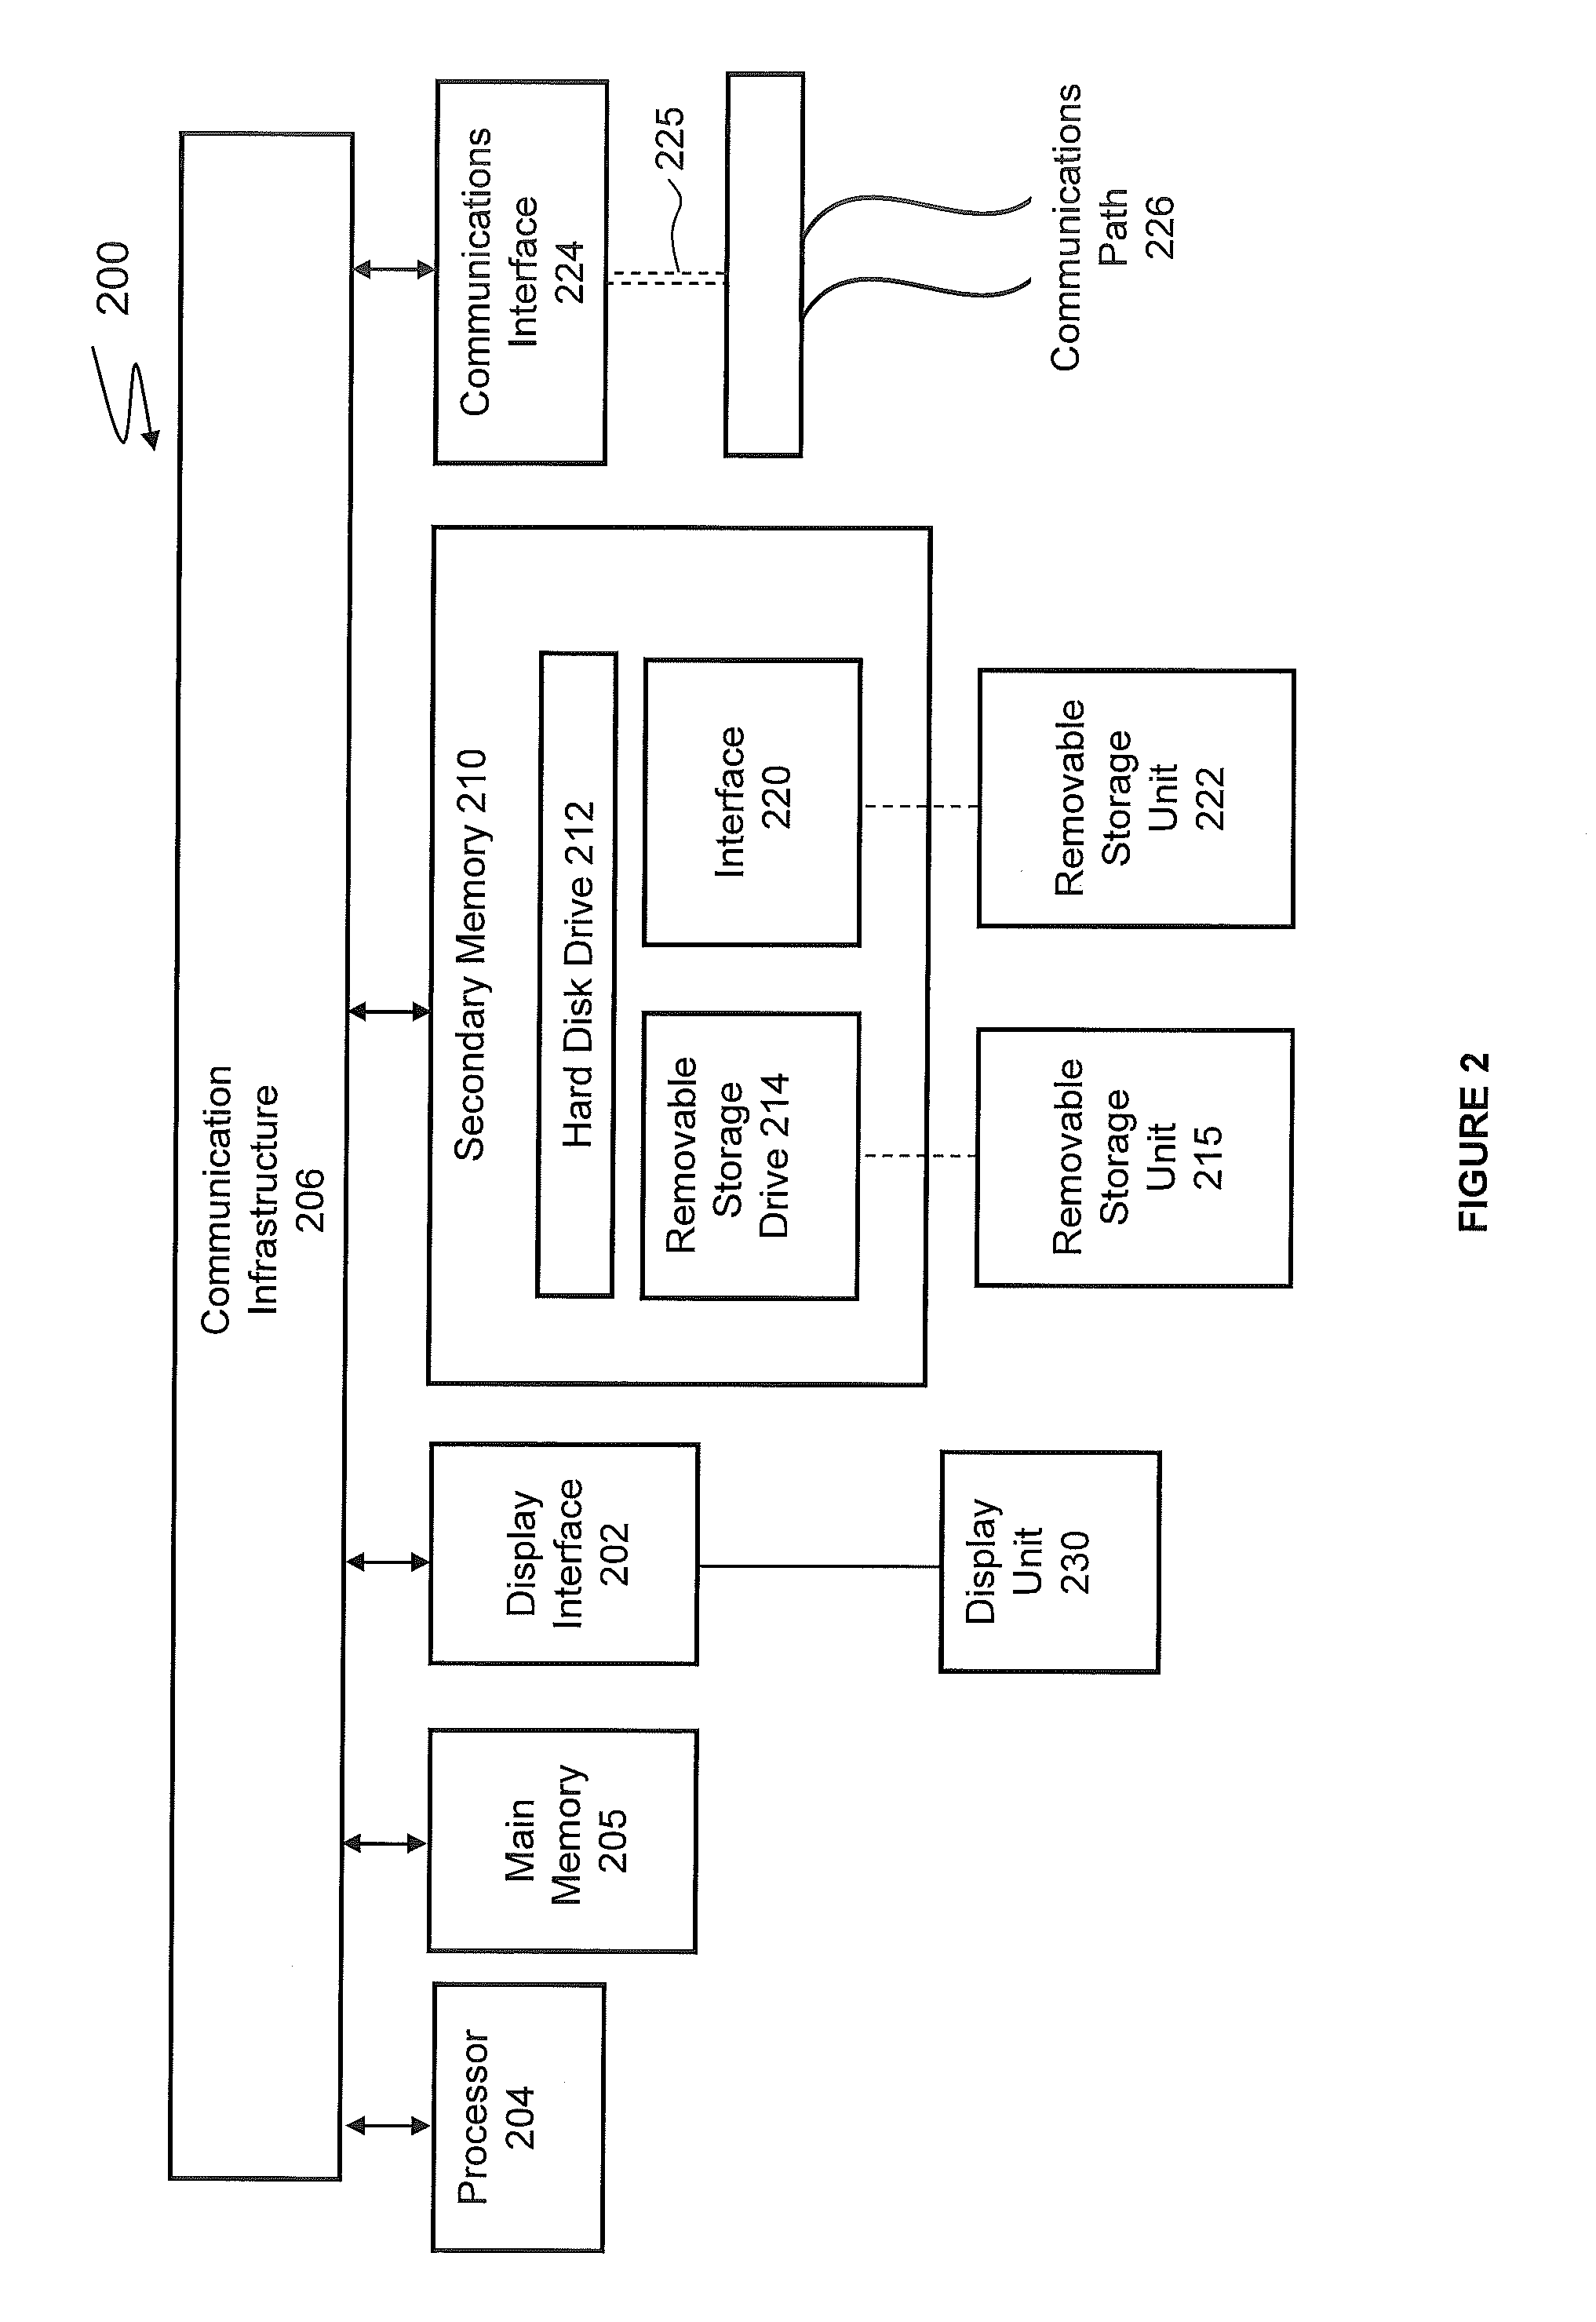 System and methods of regularized optimization for matrix factorization and image and video reconstruction